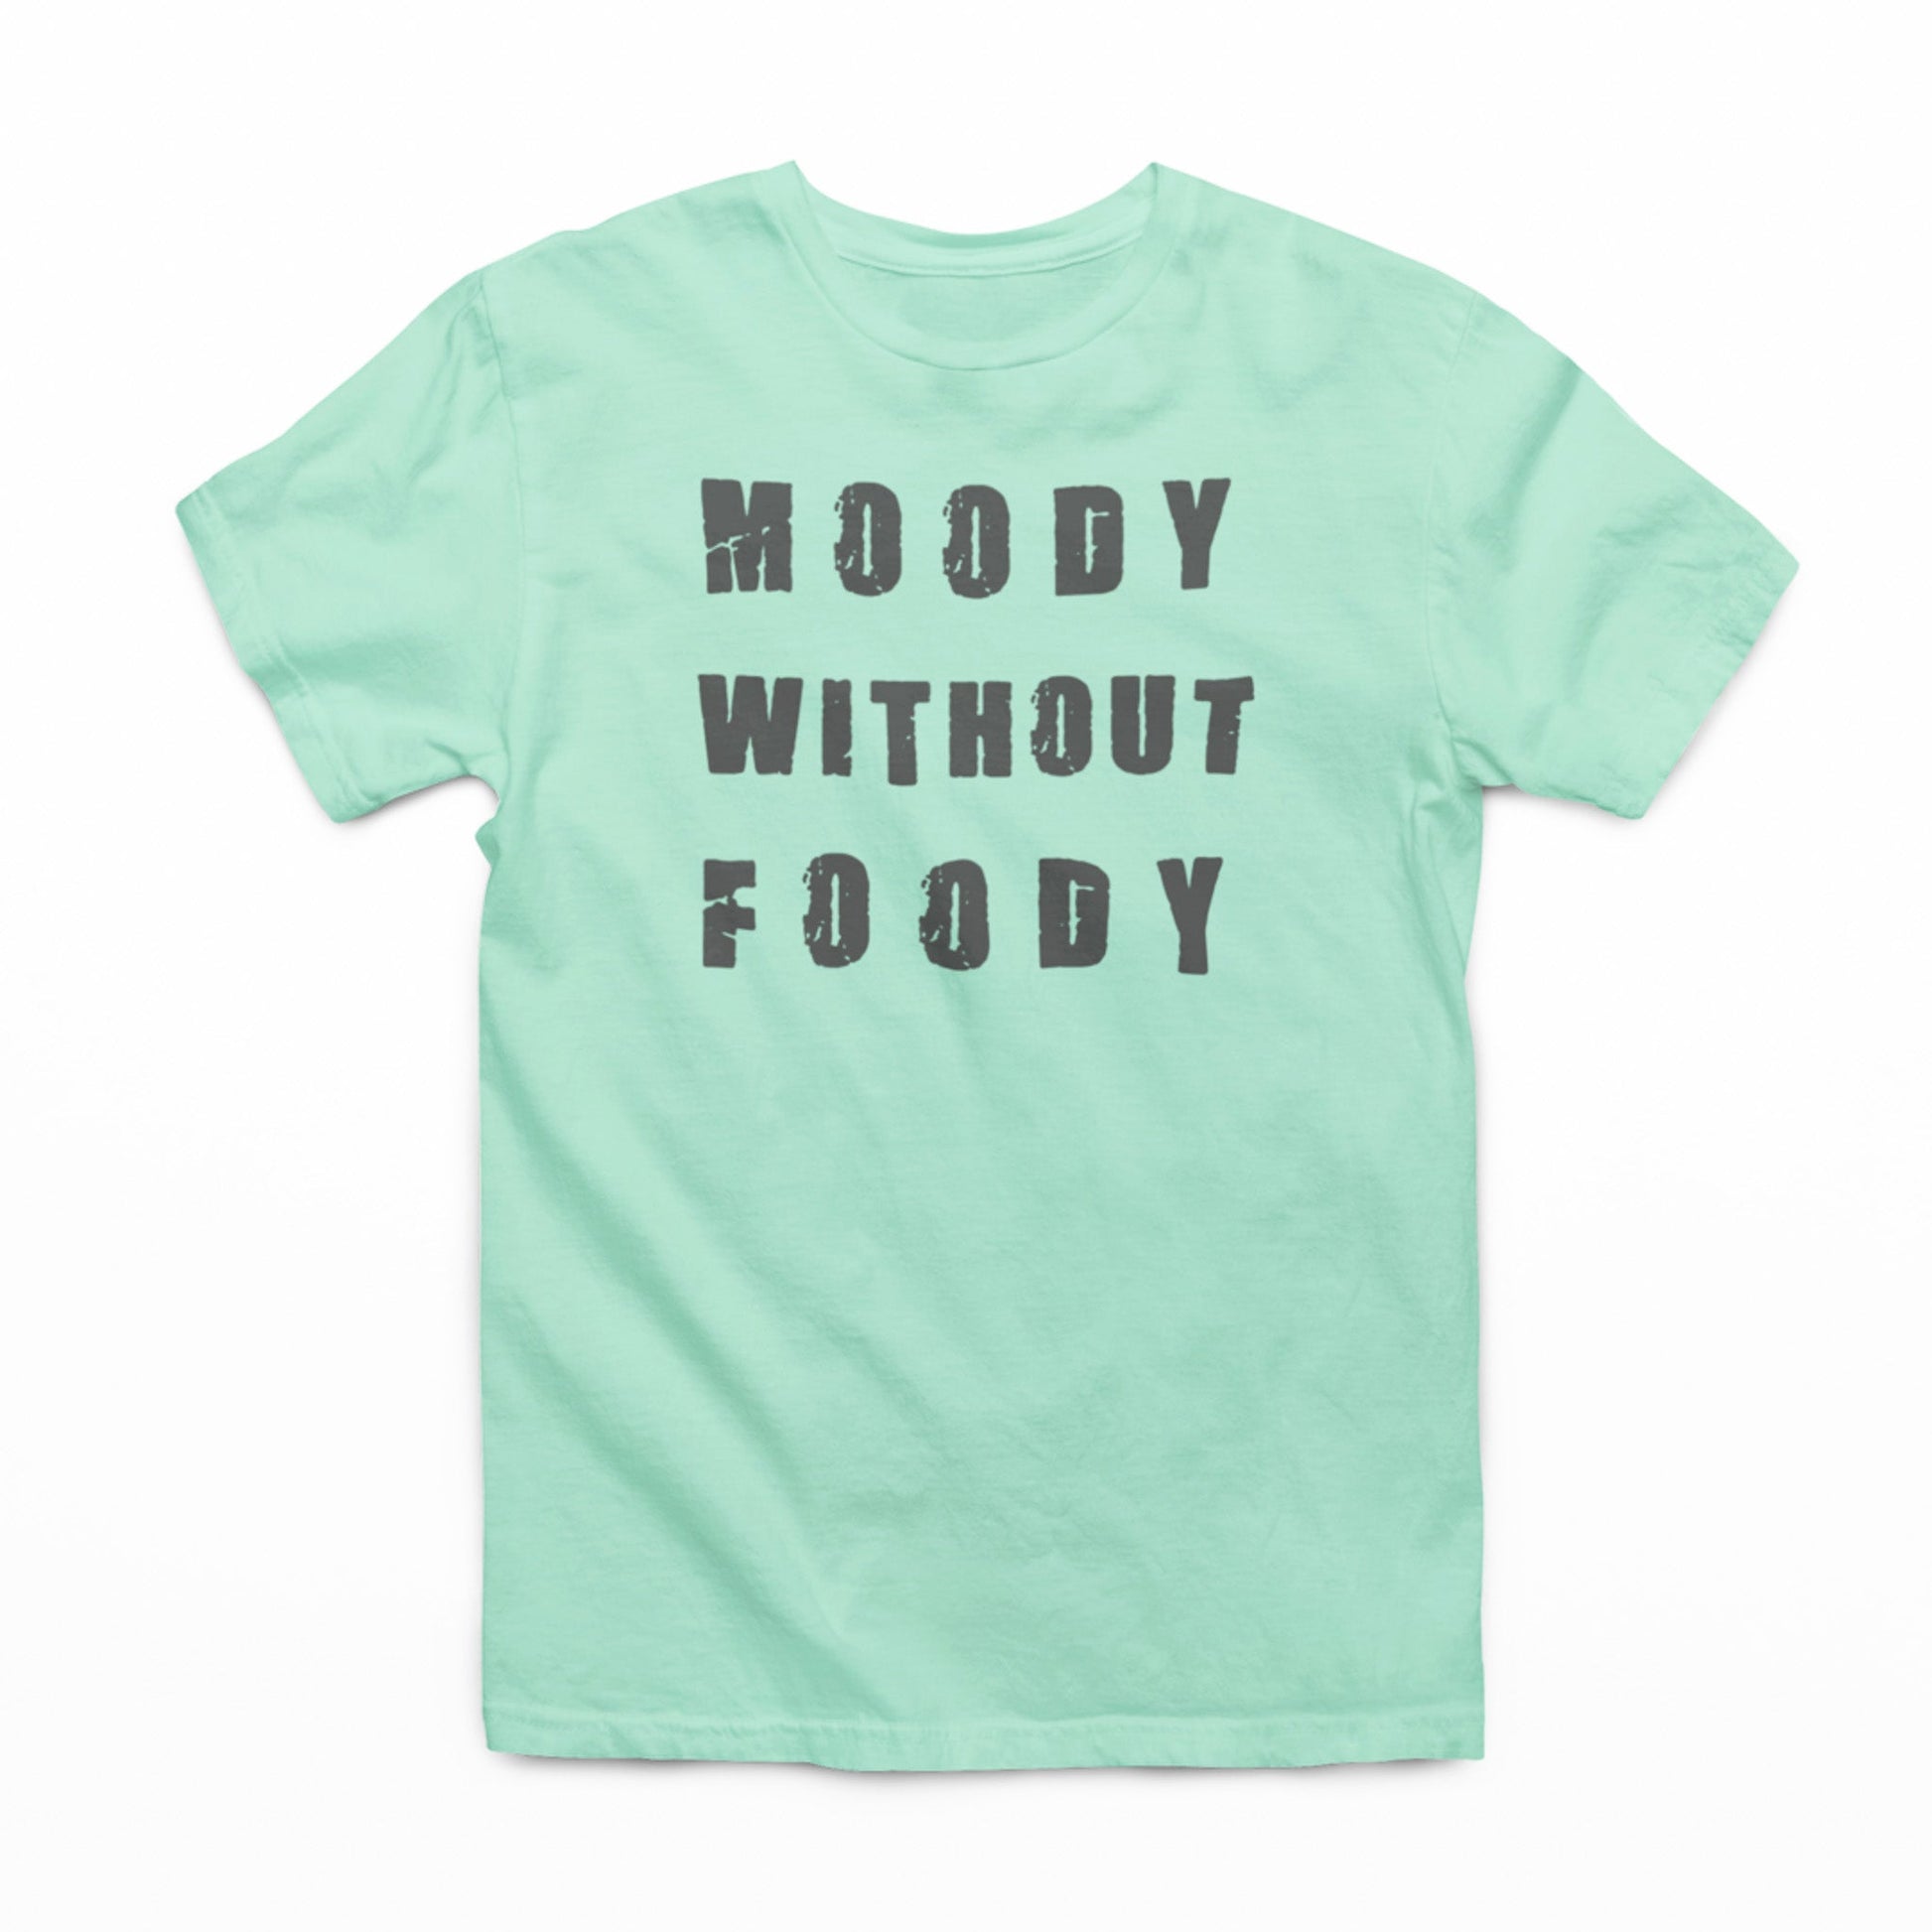 Alt text: "A flat lay of a mint green t-shirt with the phrase 'MOODY WITHOUT FOODY' in bold, distressed grey letters centered on the front. The t-shirt is displayed on a plain white background, highlighting the statement print."